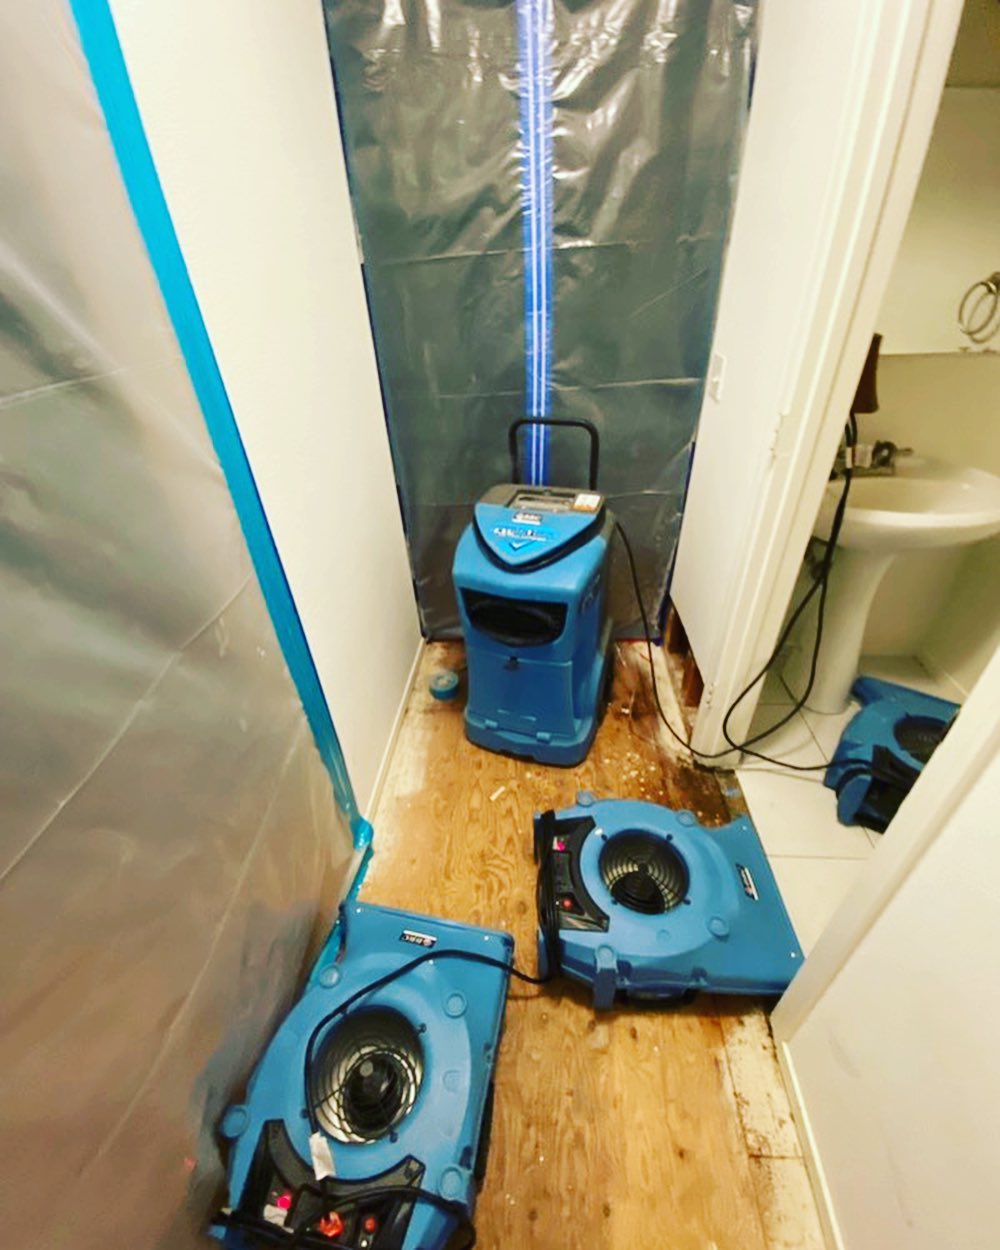 A bathroom with two blue vacuums on the floor, being cleaned by water damage remediation experts.